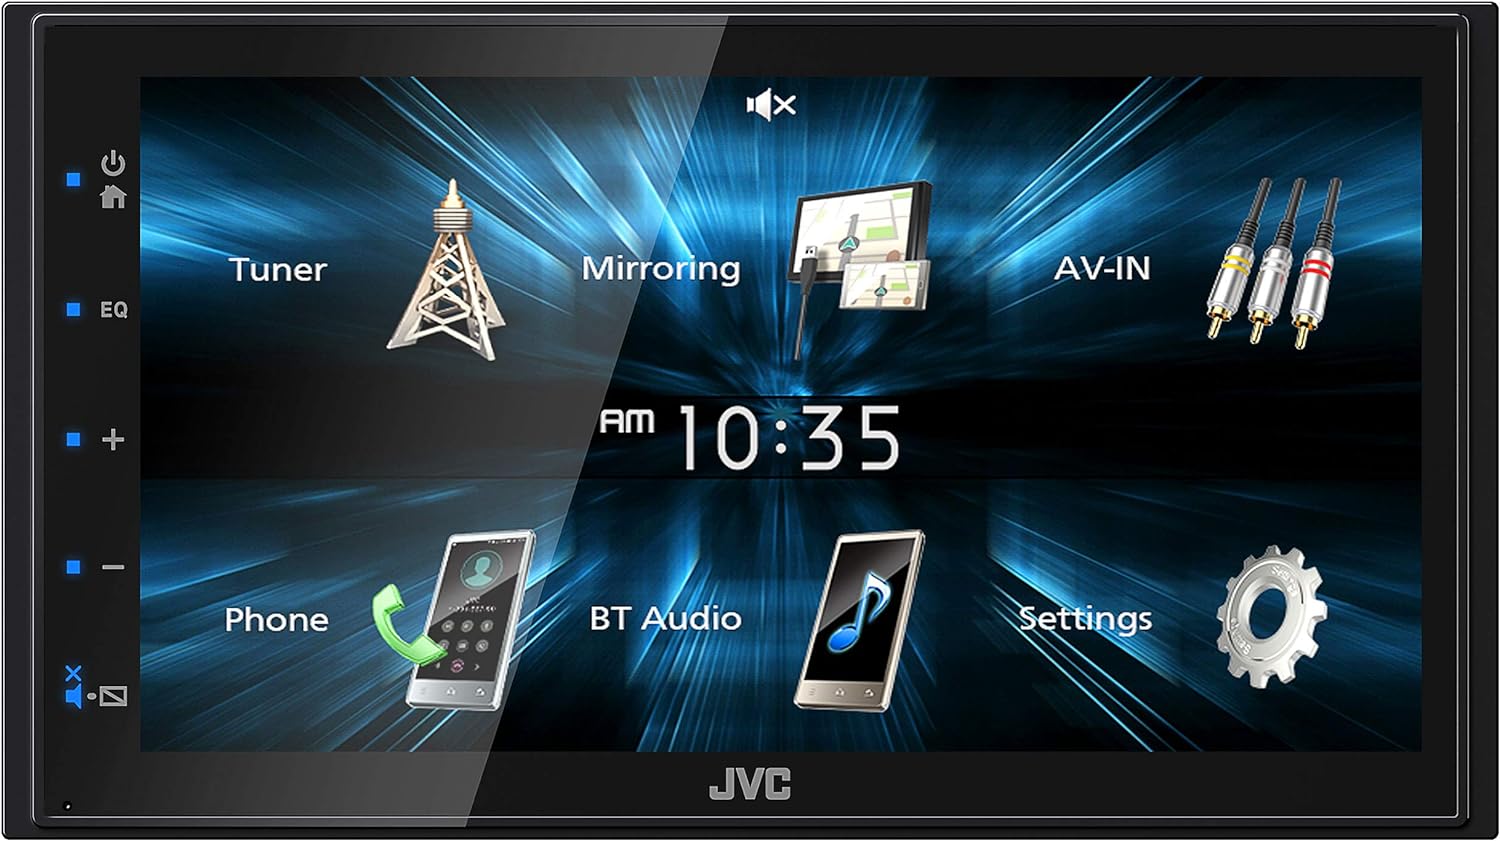 JVC KW-M150BT Bluetooth Car Stereo Receiver with USB Port  6.75 Touchscreen Display - AM/FM Radio - MP3 Player Double DIN  13-Band EQ (Black)